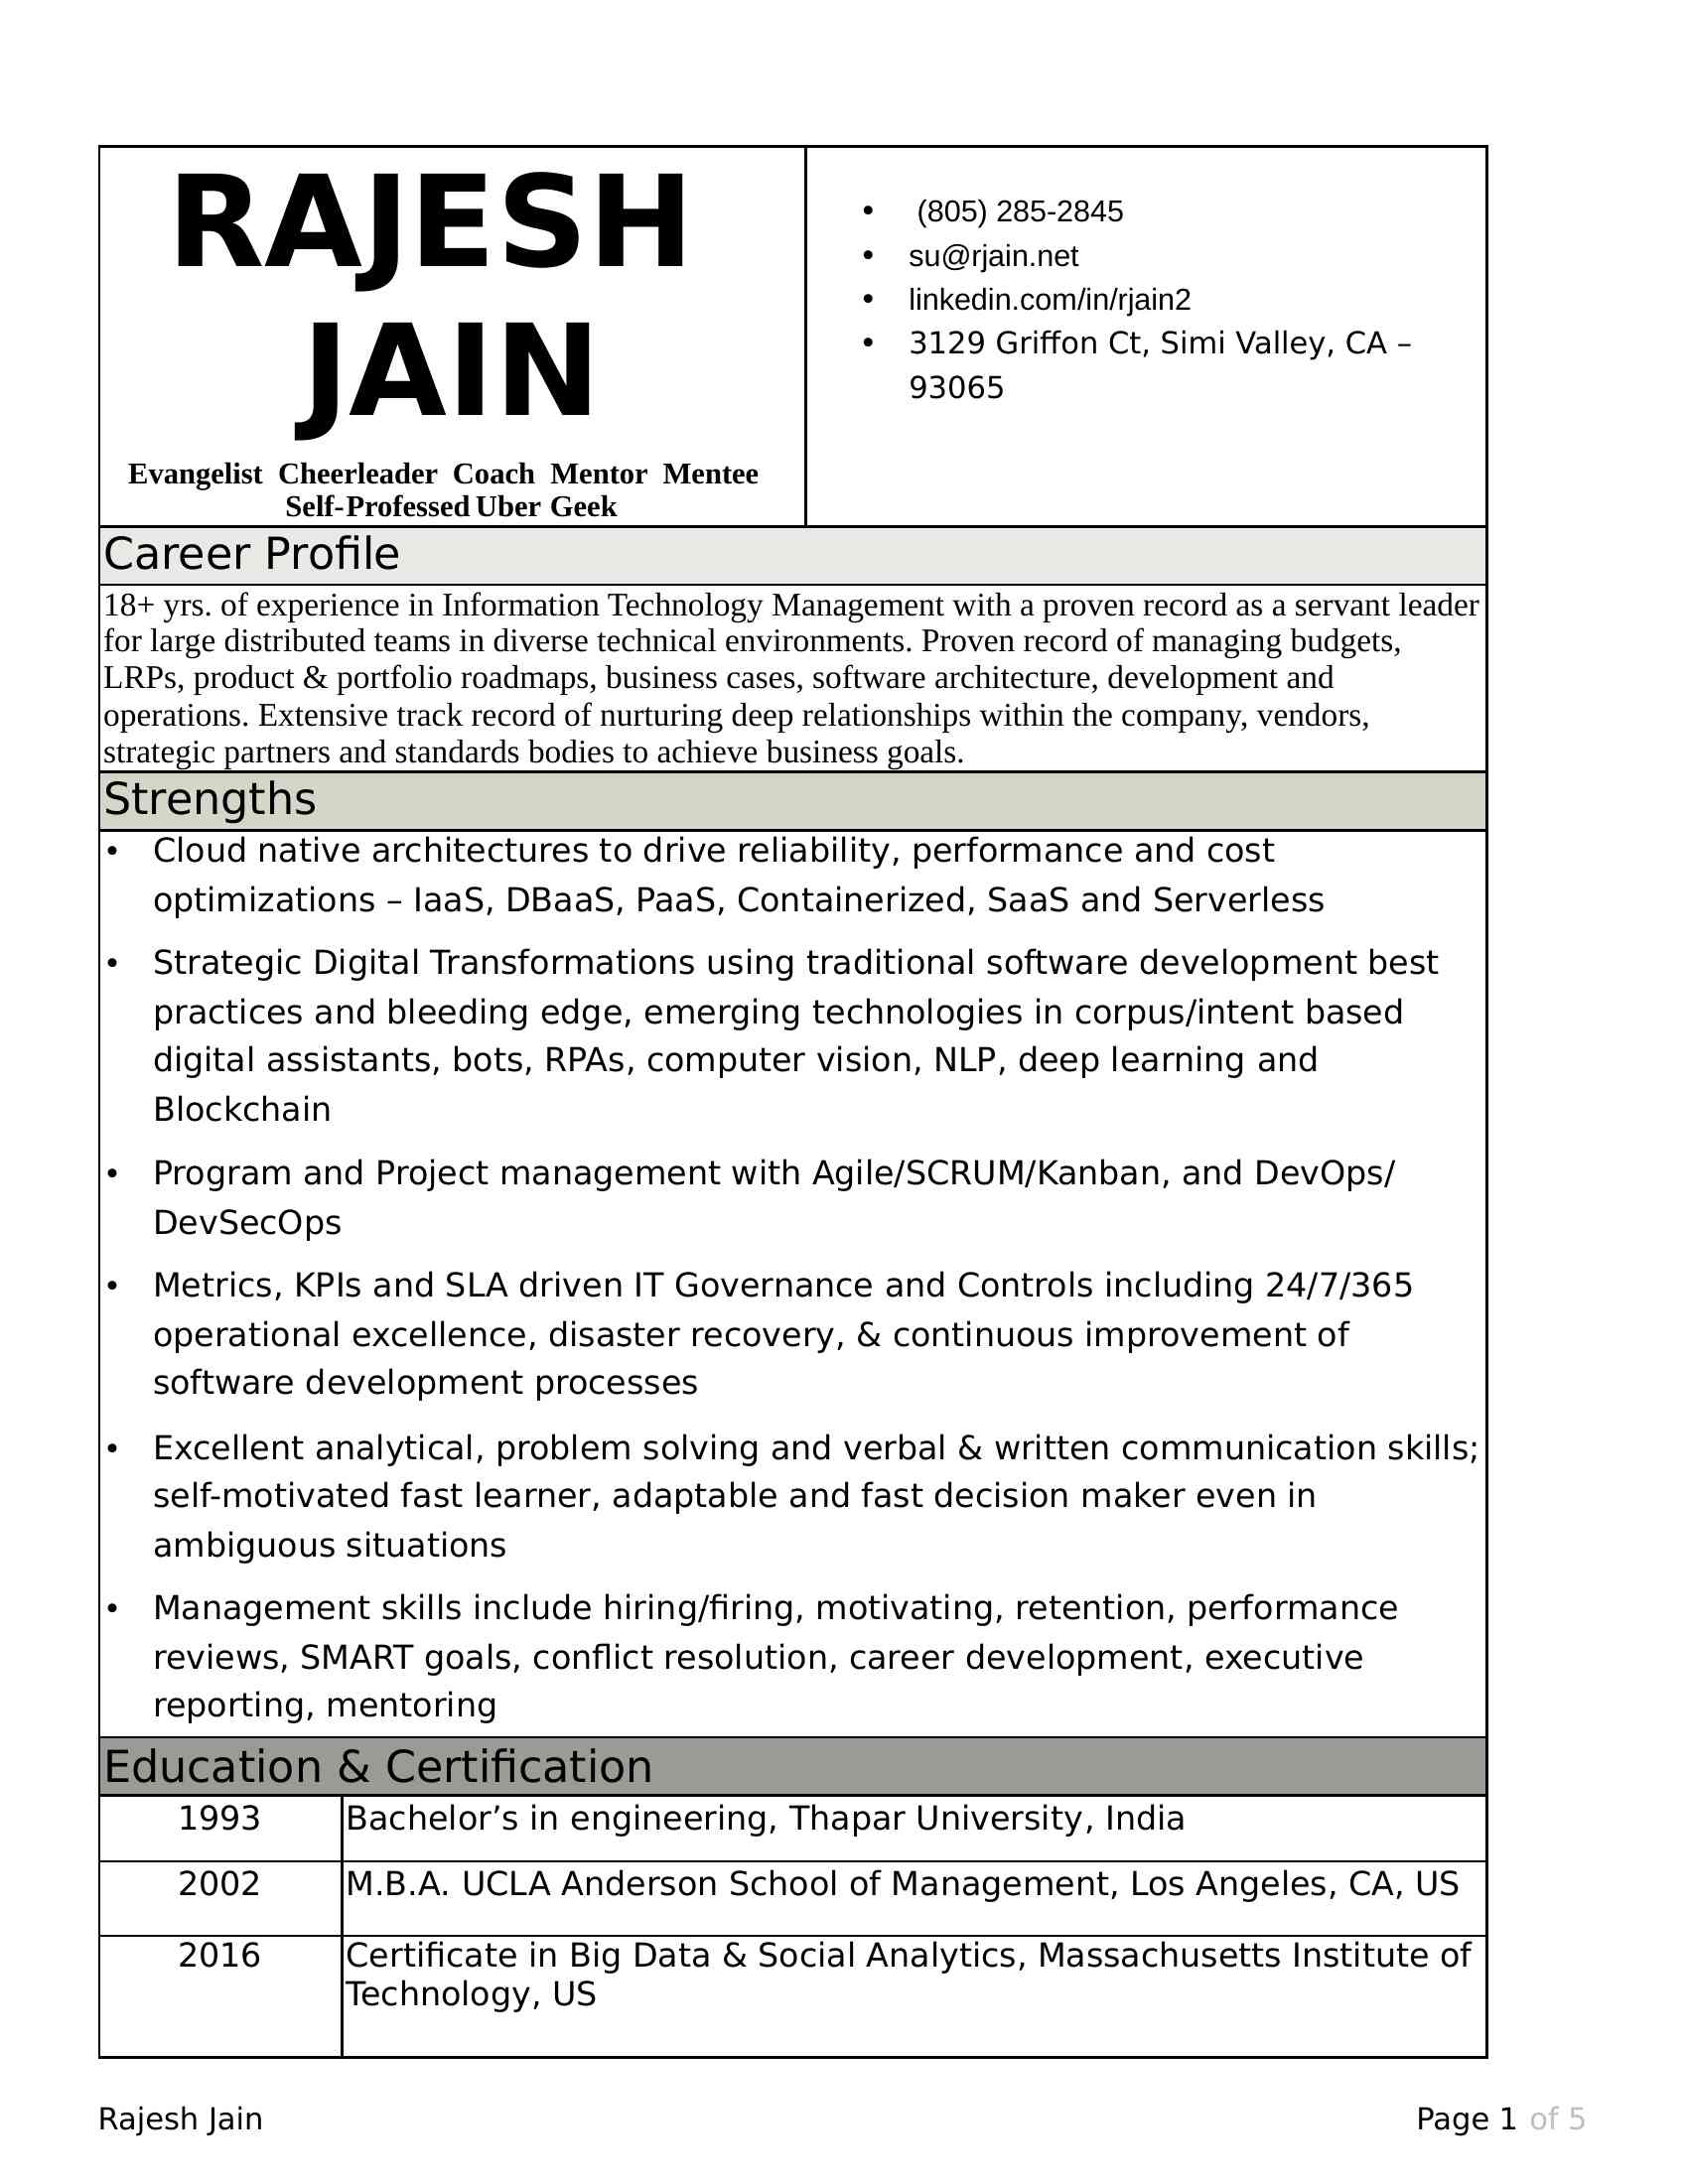 RAJESH JAIN<BR>Evangelist Cheerleader Coach Mentor Mentee Self-Professed Uber Geek<BR>   (XXX) XXX-XXXX <BR>  XXXX@XXXX.XXX<BR>  linkedin.com/in/rjain2<BR>  XXXXXX Simi Valley, CA – 93065<BR>Career Profile<BR>18+ yrs. of experience in Information Technology Management with a proven record as a servant leader for large distributed teams in diverse technical environments. Proven record of managing budgets, LRPs, product & portfolio roadmaps, business cases, software architecture, development and operations. Extensive track record of nurturing deep relationships within the company, vendors, strategic partners and standards bodies to achieve business goals.<BR>Strengths<BR>  Cloud native architectures to drive reliability, performance and cost optimizations – IaaS, DBaaS, PaaS, Containerized, SaaS and Serverless<BR>  Strategic Digital Transformations using traditional software development best practices and bleeding edge, emerging technologies in corpus/intent based digital assistants, bots, RPAs, computer vision, NLP, deep learning and Blockchain<BR>  Program and Project management with Agile/SCRUM/Kanban, and DevOps/DevSecOps<BR>  Metrics, KPIs and SLA driven IT Governance and Controls including 24/7/365 operational excellence, disaster recovery, & continuous improvement of software development processes<BR>  Excellent analytical, problem solving and verbal & written communication skills; self-motivated fast learner, adaptable and fast decision maker even in ambiguous situations<BR>  Management skills include hiring/firing, motivating, retention, performance reviews, SMART goals, conflict resolution, career development, executive reporting, mentoring<BR>Education & Certification<BR>1993<BR>Bachelor’s in engineering, Thapar University, India<BR>2002<BR>M.B.A. UCLA Anderson School of Management, Los Angeles, CA, US<BR>2016<BR>Certificate in Big Data & Social Analytics, Massachusetts Institute of Technology, US Experience<BR>Manager, Delivery TV Ent. Technology                               Nov 2013 – Current<BR>NBCUniversal, Burbank, CA<BR>Manage a large global team of up to 50 Managers, Technical Leads and Software Developers across a portfolio of 25 LOB applications. My responsibilities include:<BR>  Vendor management, RFPs, vendor selection, scope based contractual obligations, and negotiations on Fixed Bid, Fixed Scope, T&M SOWs and 3rd Party Software licensing<BR>  LRPs, short and long-term strategic Road Maps, Project Planning & Monitoring and Software Delivery <BR>  Operational Excellence using Application Performance Monitoring (APM), Log aggregation, etc.<BR>  Solution Architecture & design of complex projects and enhancements to existing products<BR>  All aspects of IT Management – Hiring, Up/Out, developing trust based on highly advanced technical knowledge, motivating actively, <BR>Key Contributions: <BR>  Reshaped the SDLC within the first 90 days from an everything-goes to an Agile (SCRUM) based process, substantially improving on-time and on-budget deliveries<BR>  Introduced Jira as part of the transformation which snowballed into centralization of fractured implementations and adoption by thousands of people across the company<BR>  Stabilized a key VOD Rights and Windows management application with many technical challenges including performance and data corruption. Improved the resiliency of the platform, and reduced the technical debt enabling faster features development<BR>  Substantially improved MTTR and RCA by adopting Splunk and AppDynamics, and by establishing proactive alerts to detect problems earlier than the users<BR>  Strongly Influenced the UI/UX of a touch-enabled web and iOS application used by top executives. Established and delivered very stringent performance, quality and reliability requirements<BR>  Established a cloud-native, 12-factor architecture of an application deployed on AWS using Elastic Bean Stalk, RDS, SNS, and other related AWS services<BR>  Nominated on NBC-wide Cloud-first strategic committees. Key role & contributions to Identity Management (IdM) and REST based API reference architectures<BR>Technologies included – Java, .NET, iOS (Objective-c / Swift) HTML, JavaScript, PHP/Drupal OnPrem & Cloud-native architectures at all levels of abstraction (IaaS, PaaS, 12-factor, Containerized & Serverless)<BR>Senior Director, Solutions Architecture and PMO                      Jan 2011—May 2013<BR>Deluxe Digital Distribution, Burbank, CA<BR>Headed the Solution Architecture and Project Management Office responsible for designing and delivering marquee consumer facing digital streaming on Web, iOS, Android, ROKU, XBOX and other platforms. My Responsibilities included:<BR>  Architectural SME for pre-sales and business development executives on key accounts such as Target, STARZ, Barnes & Noble, Dish Network, etc.<BR>  Product Strategy and roadmaps for critical components of the Video Streaming platform including devices, Catalog, Apple/Google/Microsoft DRM and Digital lockers<BR>  Project management, scope management, problem resolution, delivery and launch of the client-company’s products to its customers<BR>  Relationship management with internal and external strategic partners<BR>Key Contributions<BR>  Helped win a $9 million-dollar account with Barnes & Noble based on establishing trust and relationship with the head of Nook device development by answering and proposing solutions to tough technical problems. Even wrote Java code for video playback of DRM content such as Movies & TV Shows on Nook’s highly customized Android platform<BR>  A unique Public Key Infrastructure (PKI) based shared-responsibility security model to authenticate and authorize issuing of DRM keys for video playback of encrypted content, which garnered interest from Charter Communications<BR>  Recognized and promoted to Senior Director within 6 months of joining the company<BR>Other past experience includes <BR>  Media & Entertainment: Turning around a troubled project and relationships to complete and launch Disney’s EST video streaming platform-Disney Movies Anywhere (July 2010-Dec 2010). As a gesture of recognition, I was presented with a framed plaque by Disney employees<BR>  Regulated Payment Processing: Managing a team of Business Analysts, Architects & Web Developers at Green Dot (Mar 2010-July2010) to build multiple consumer facing web sites, including Walmart MoneyCard<BR>  Regulated Banking & Finance: Solution architecture at Bank of America (Oct 2009-Feb 2010) for processing 12-million home-loans every day for Federal HARP compliance requirements<BR>  Regulated Finance & Lending: First Vice President at Countrywide managing a team of 15 onshore and offshore Architects, Developers, and QA to deliver a $1.7 million lead management project with an ROI of $29.3 million<BR>  Regulated Finance & Lending: Technical Lead and Development Manager at IndyMac for automated underwriting and pricing systems. As a member of a team, built the first such web ecommerce solution in the US mortgage market. Proposed, brought consensus by demonstrating a POC, and built a C++ engine improving performance by 75% Detailed Technical Skills<BR>Cloud: Amazon EC2, RDS and other IaaS, Elastic Beanstalk (PaaS), Lambdas (Serverless), API gateway, Alexa, Fargate etc. Similar & corresponding experience on Microsoft’s Azure, Heroku and Cloud foundry including containers such as Docker and Rkt, orchestration with Docker Swarm & Kubernetes, Envoy, etc. Keen interest in Cloud Native Computing Foundation’s (CNCF) OCI standardization<BR>Software Engineering and Delivery: Scrum, Kanban and eXtreme Programming, Waterfall in a highly regulated environment. DevOps using Agile methodologies, Git based development workflows, continuous delivery (CD) using Jenkins, Artifactory & Nexus. Automated unit testing and end-to-end (e2e) testing, code quality, code coverage, test coverage, and other metrics using SonarQube. DevSecOps by incorporating Veracode, Snyk, etc. Canary releases, A/B testing, and feature-activated coding methods. Operations and disaster recovery with defined RTO & RPO<BR>Technology Platforms: Linux, Windows, Java, .NET, C, C++, C#, NodeJS, JavaScript/ES6, Typescript, Databases such as SQL Server, Oracle, MySQL, Postgres, SQLite, Realm, Swift & Objective-C for iOS applications. Experience with Social Analytics (close-knit Networks & Decision Trees) and some experience on supervised learning, Architecture & Design patterns and anti-patterns<BR>Rajesh Jain    Page 1 of 5<BR>